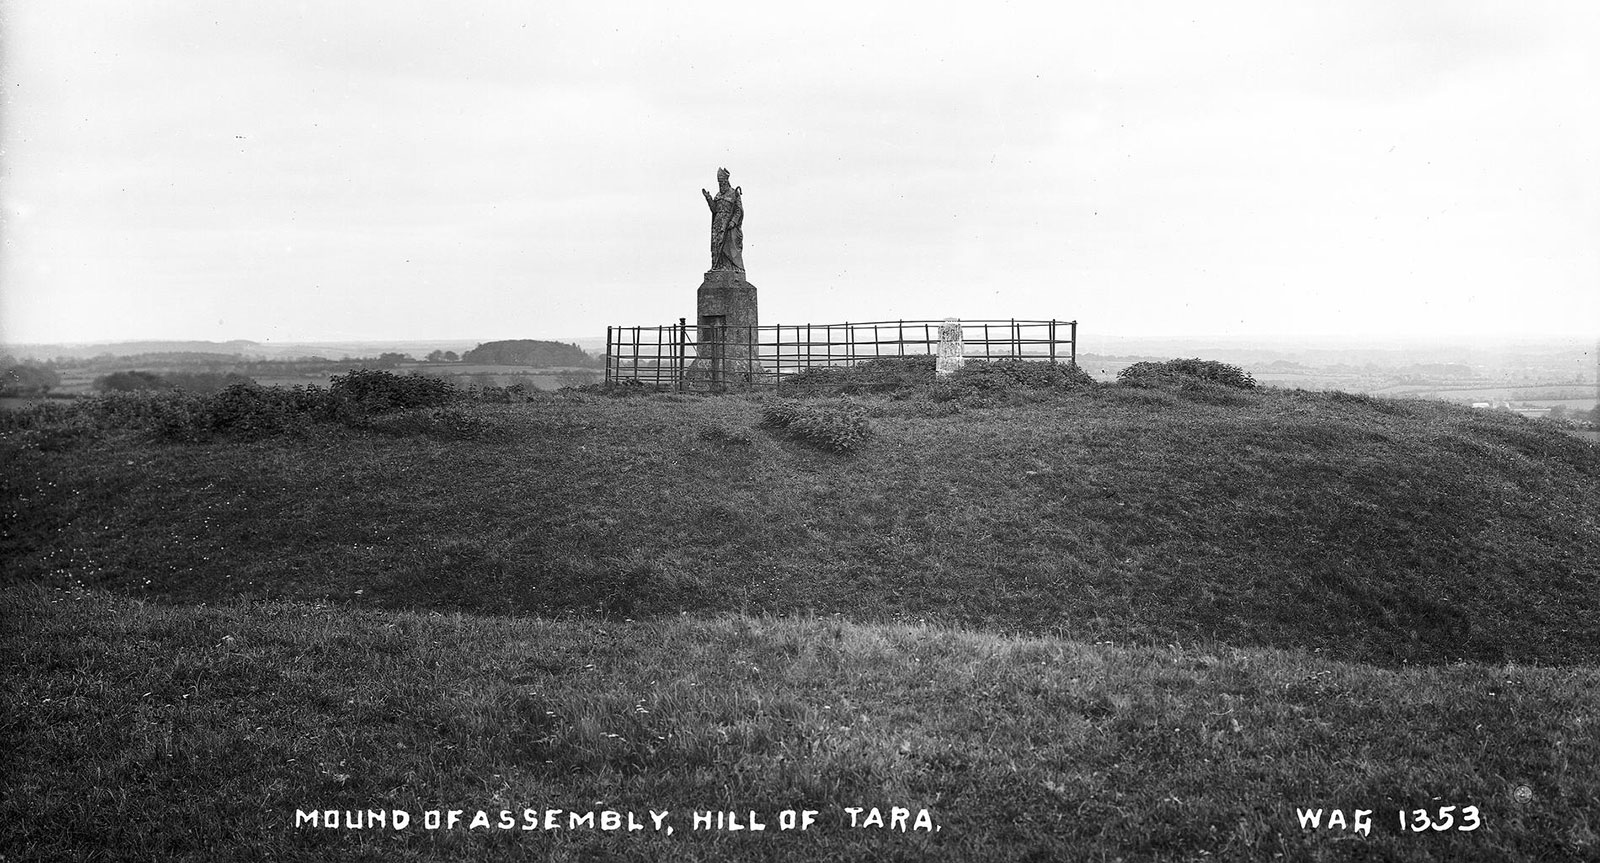 The Mound of Assembly on the Hill of Tara.